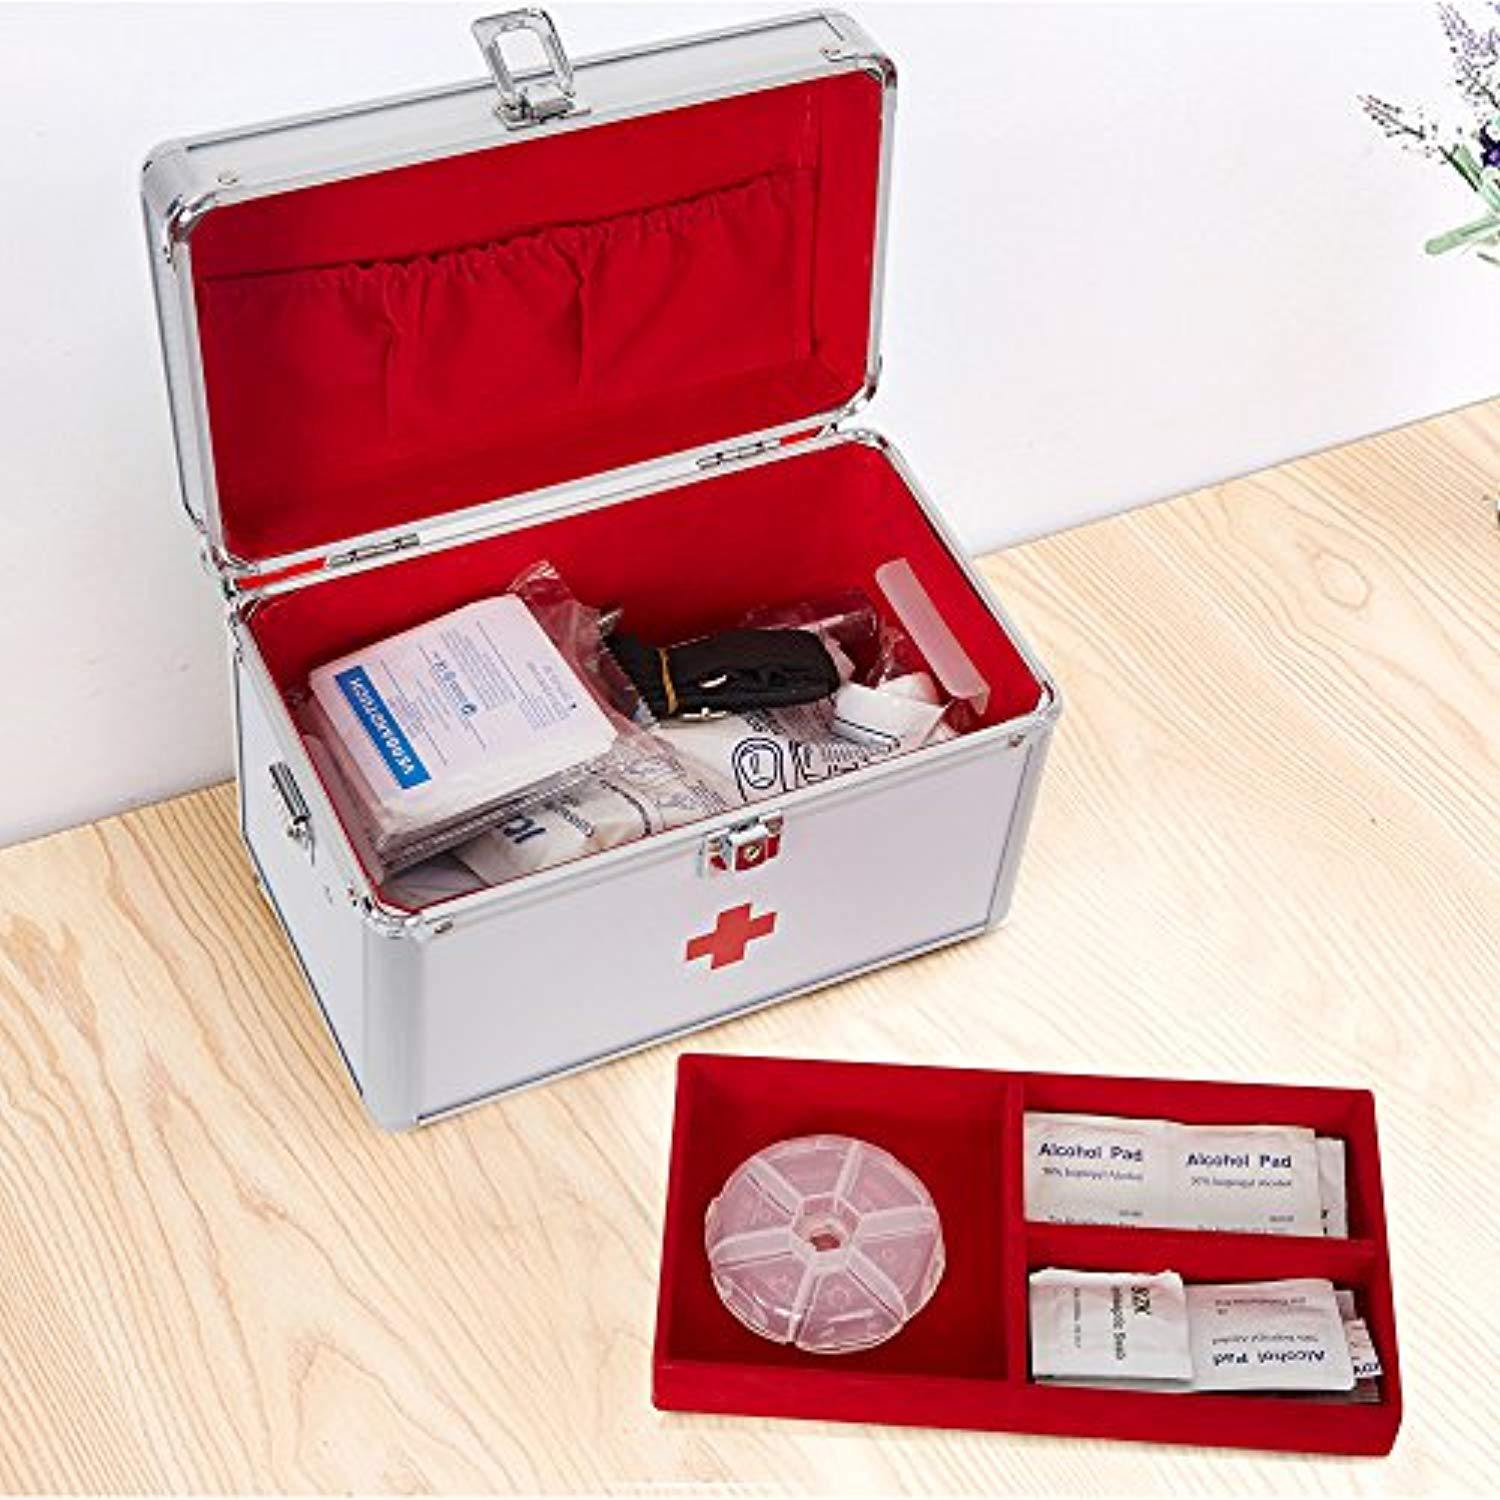 Bosonshop Lockable Medicine Storage Box,First Aid Box with Compartments